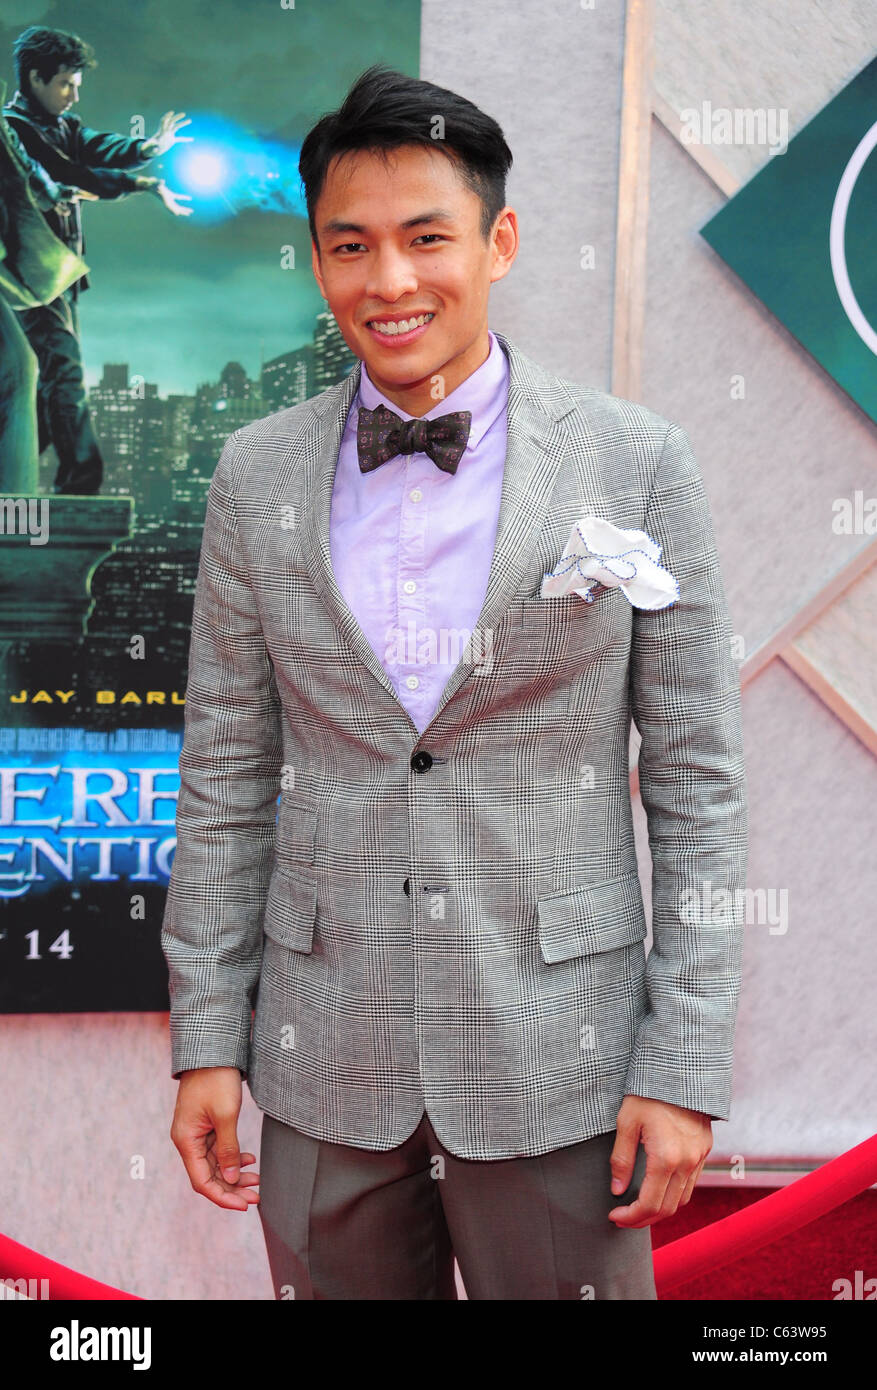 Gregory Woo at arrivals for THE SORCERER'S APPRENTICE Premiere, New Amsterdam Theatre, New York, NY July 6, 2010. Photo By: Gregorio T. Binuya/Everett Collection Stock Photo